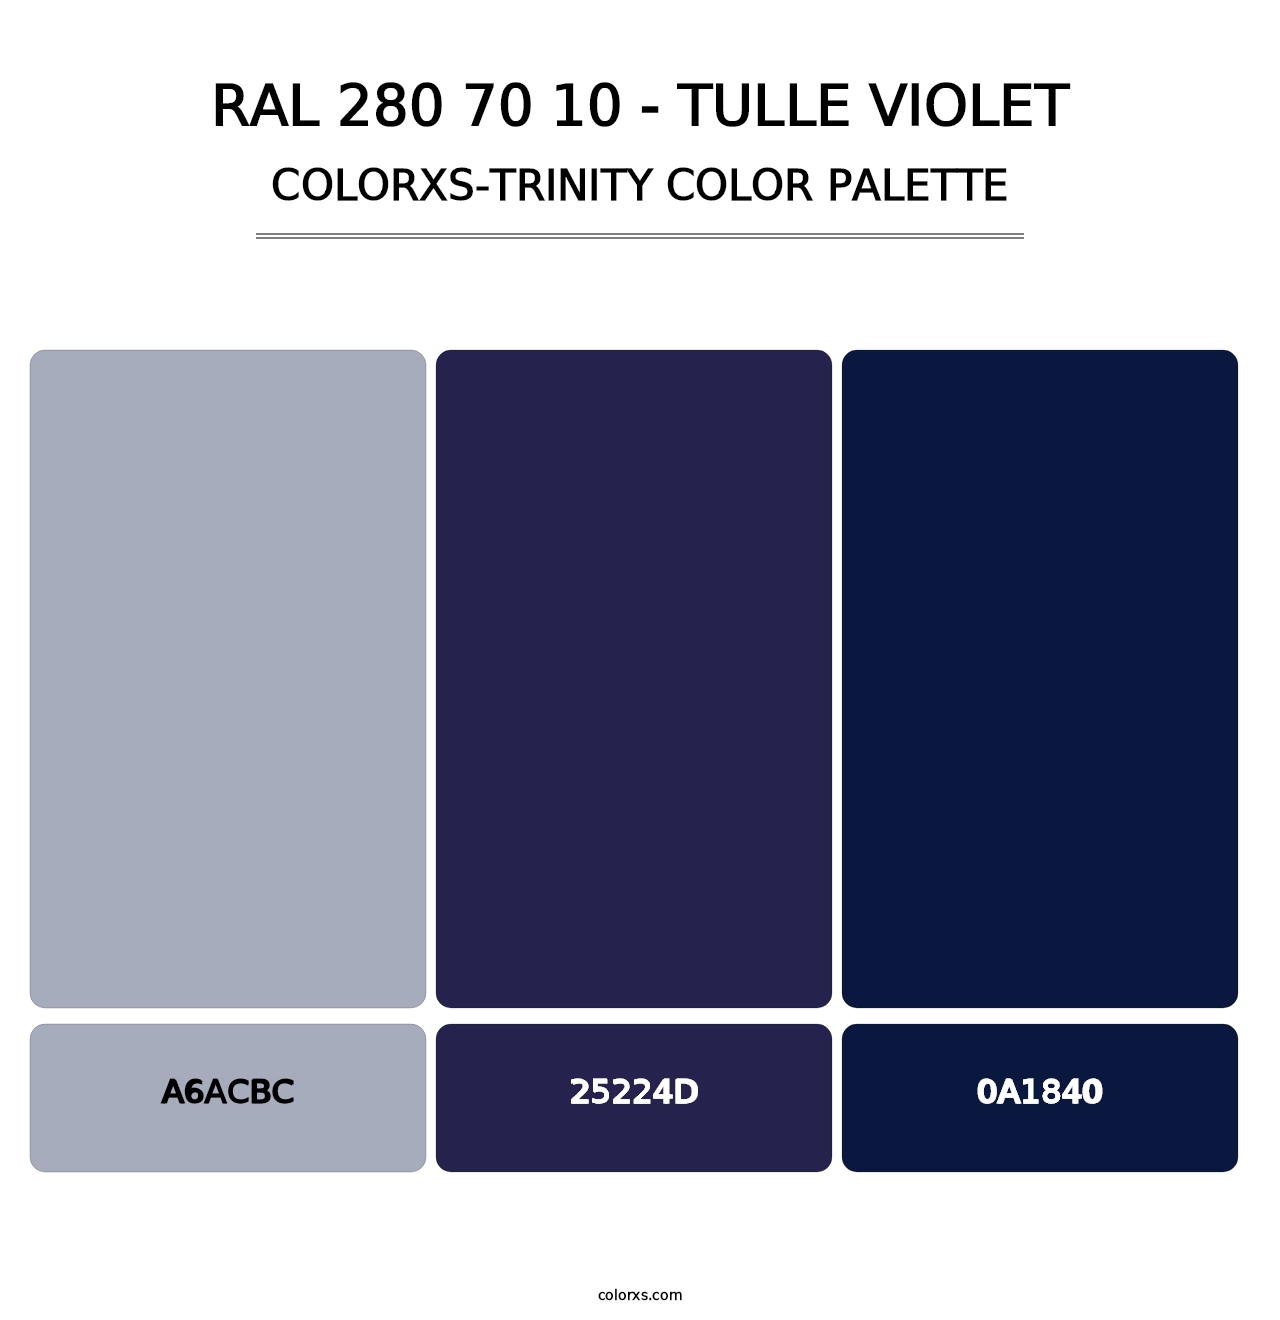 RAL 280 70 10 - Tulle Violet - Colorxs Trinity Palette